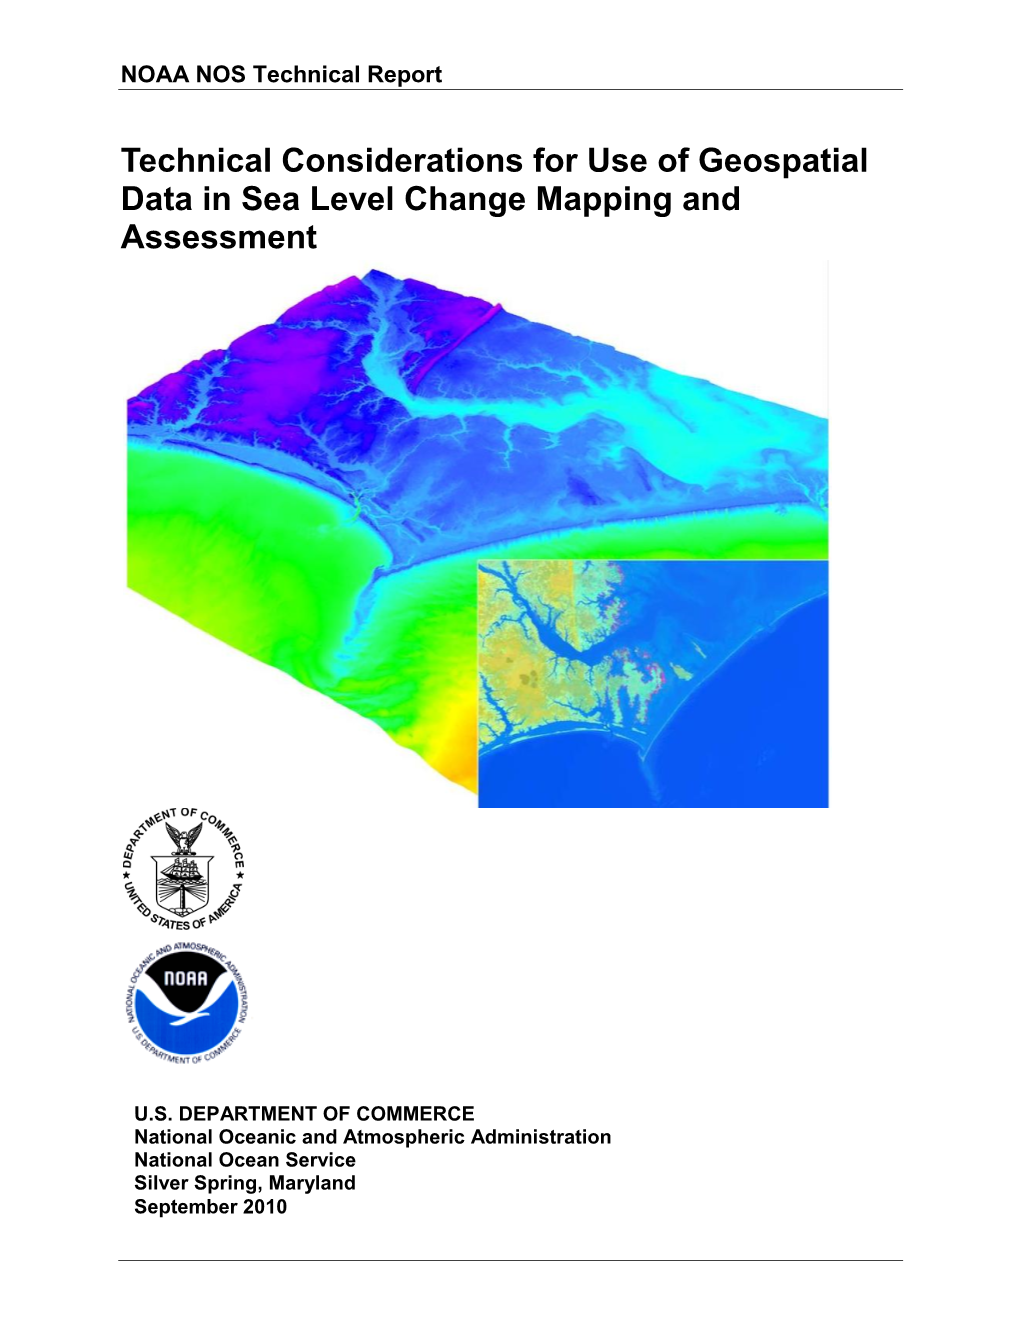 Technical Considerations for Use of Geospatial Data in Sea Level Change Mapping and Assessment